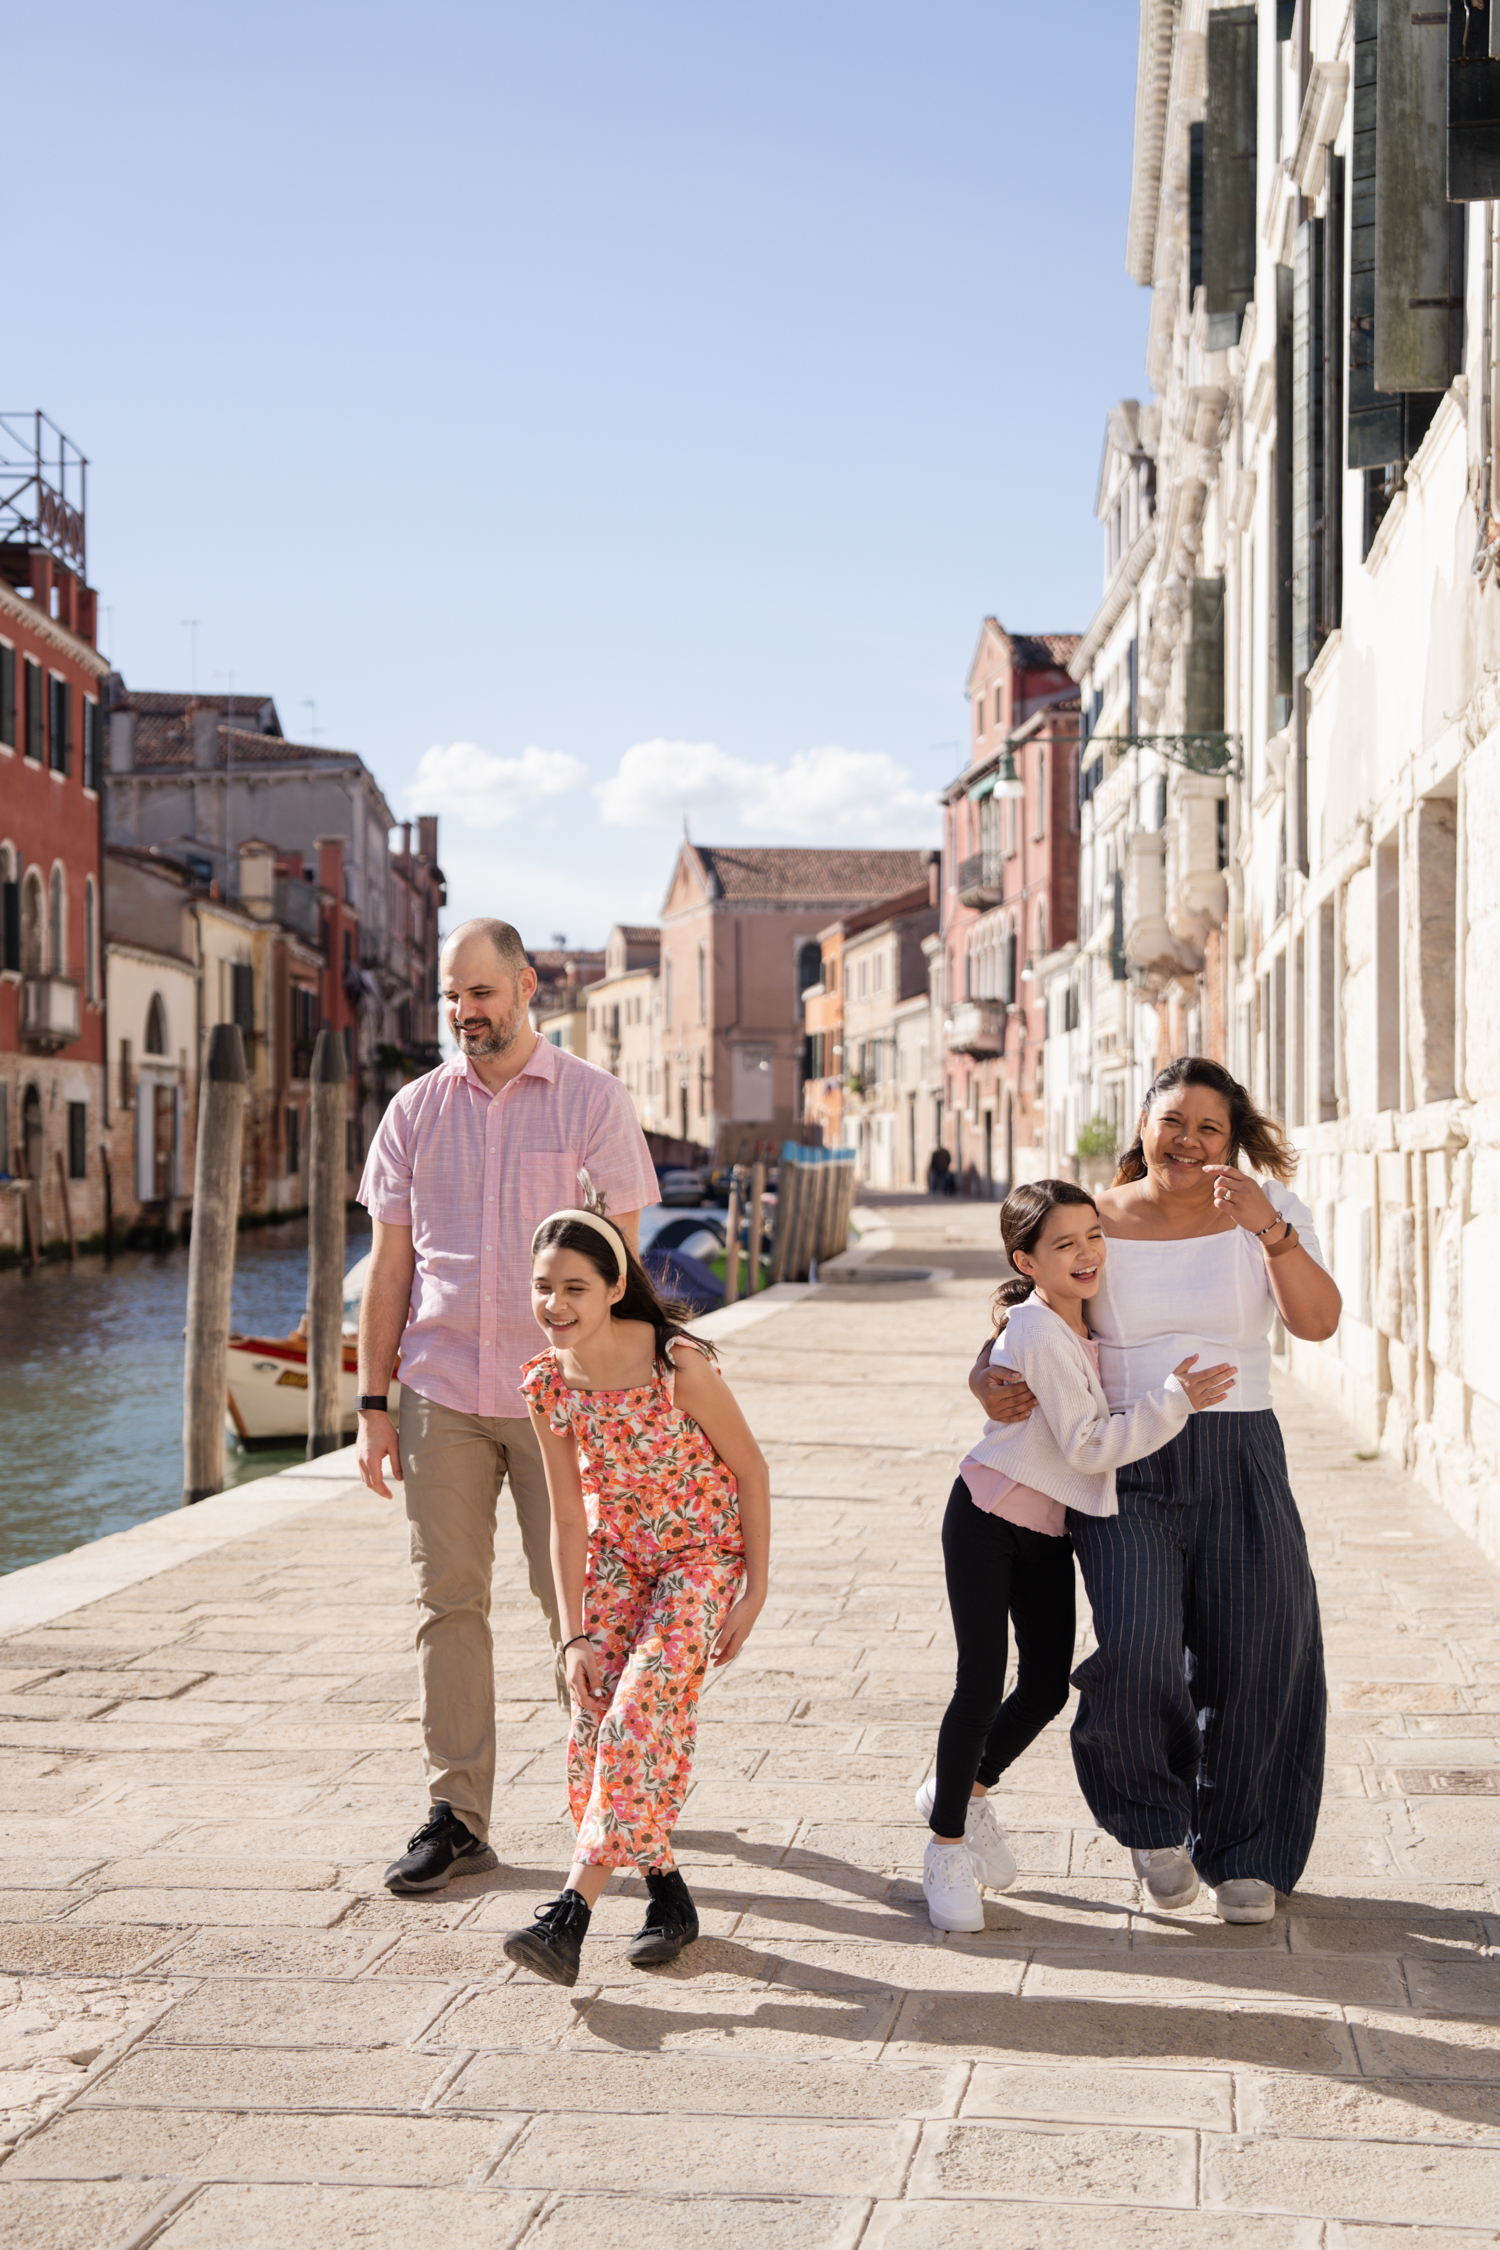 This fun photoshoot makes you dream of a vacation with your kinds in Venice. Book your photographer now!